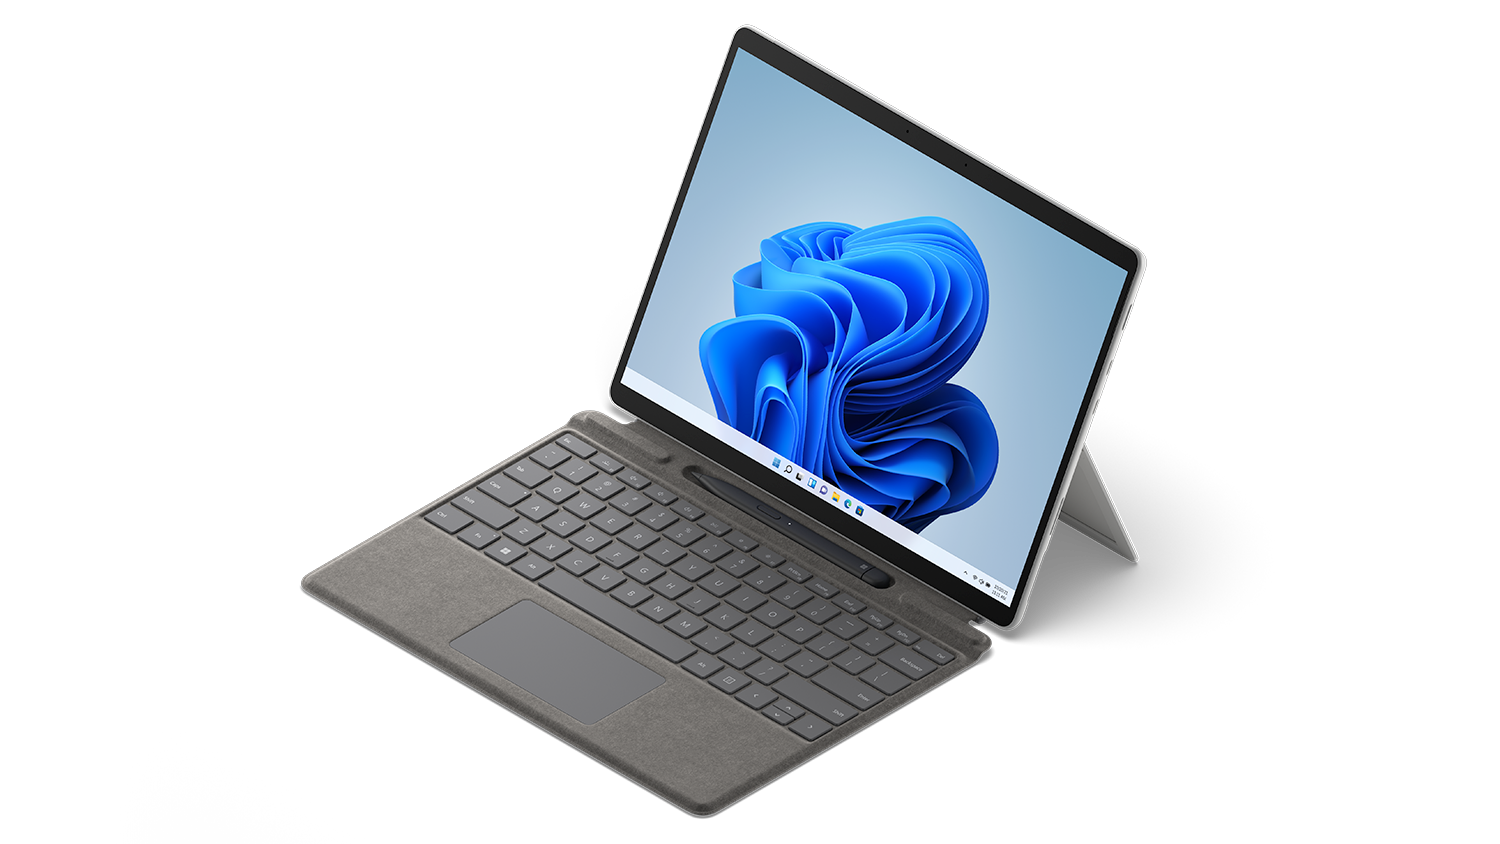 Surface Pro 8 shown in kickstand mode.